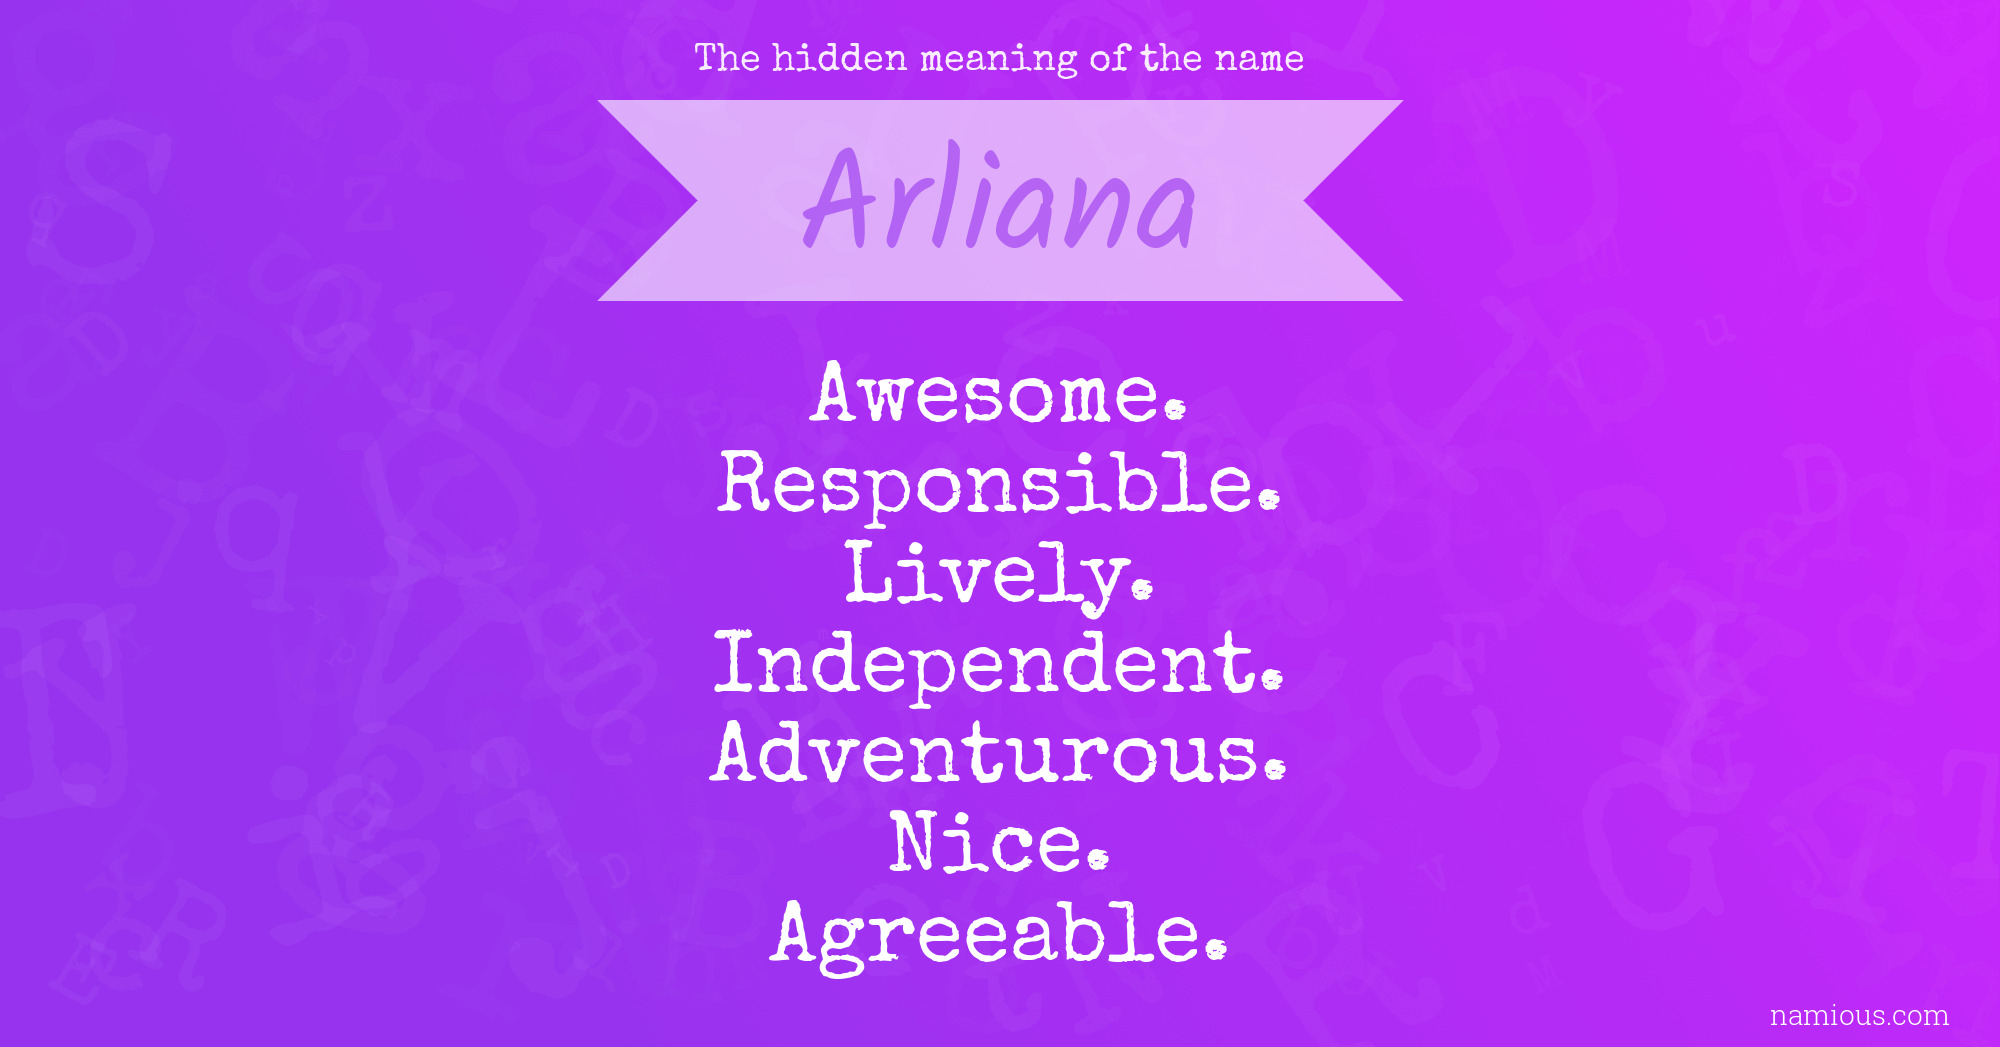 The hidden meaning of the name Arliana